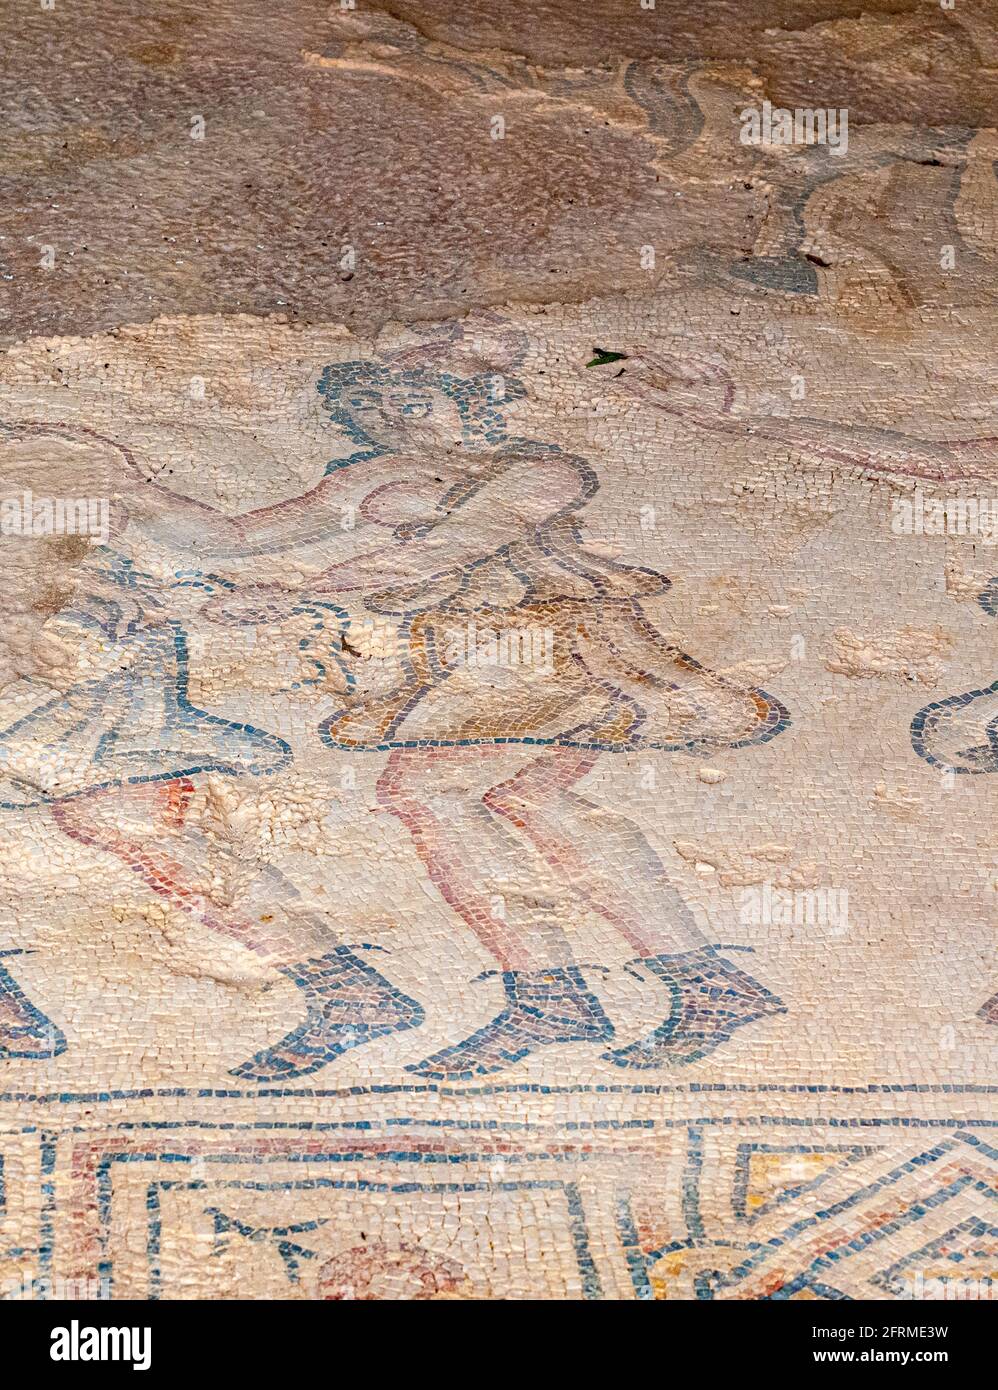 The Amazons participating in the festivities Mosaic (detail) in the Nile House at Zippori National Park The city of Zippori (Sepphoris) A Roman Byzant Stock Photo